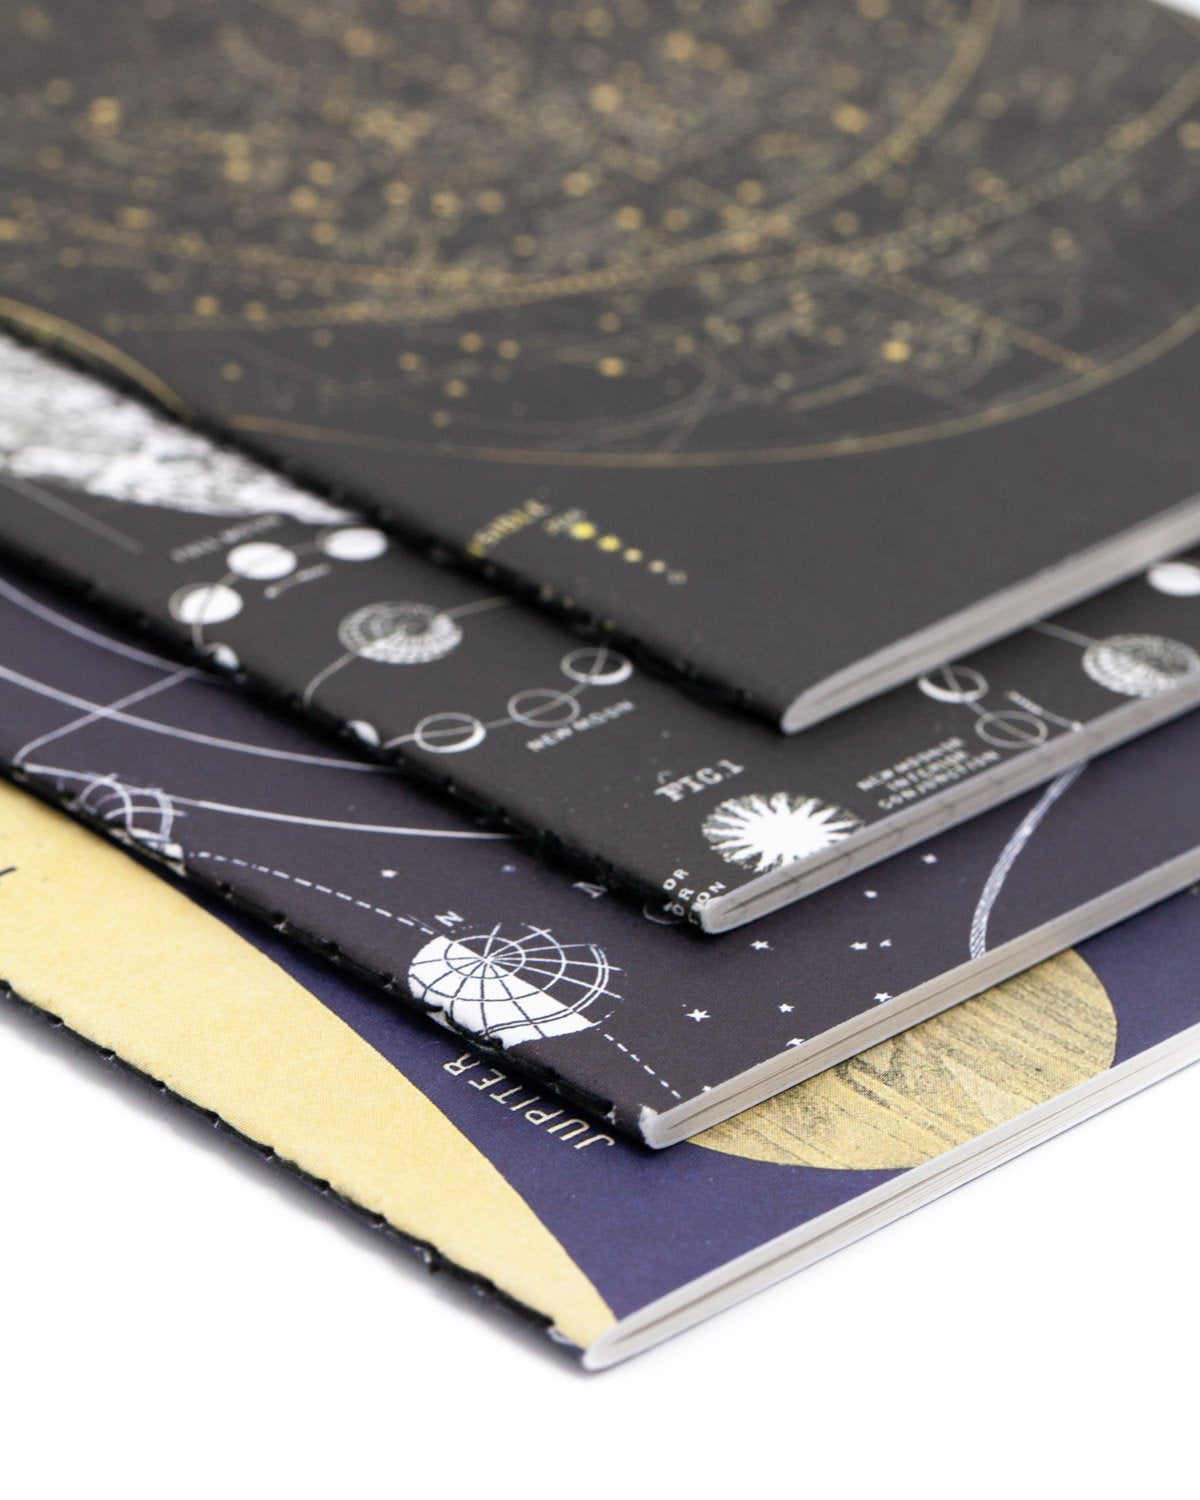 Astronomy Pocket Notebooks 4-pack - Cognitive Surplus